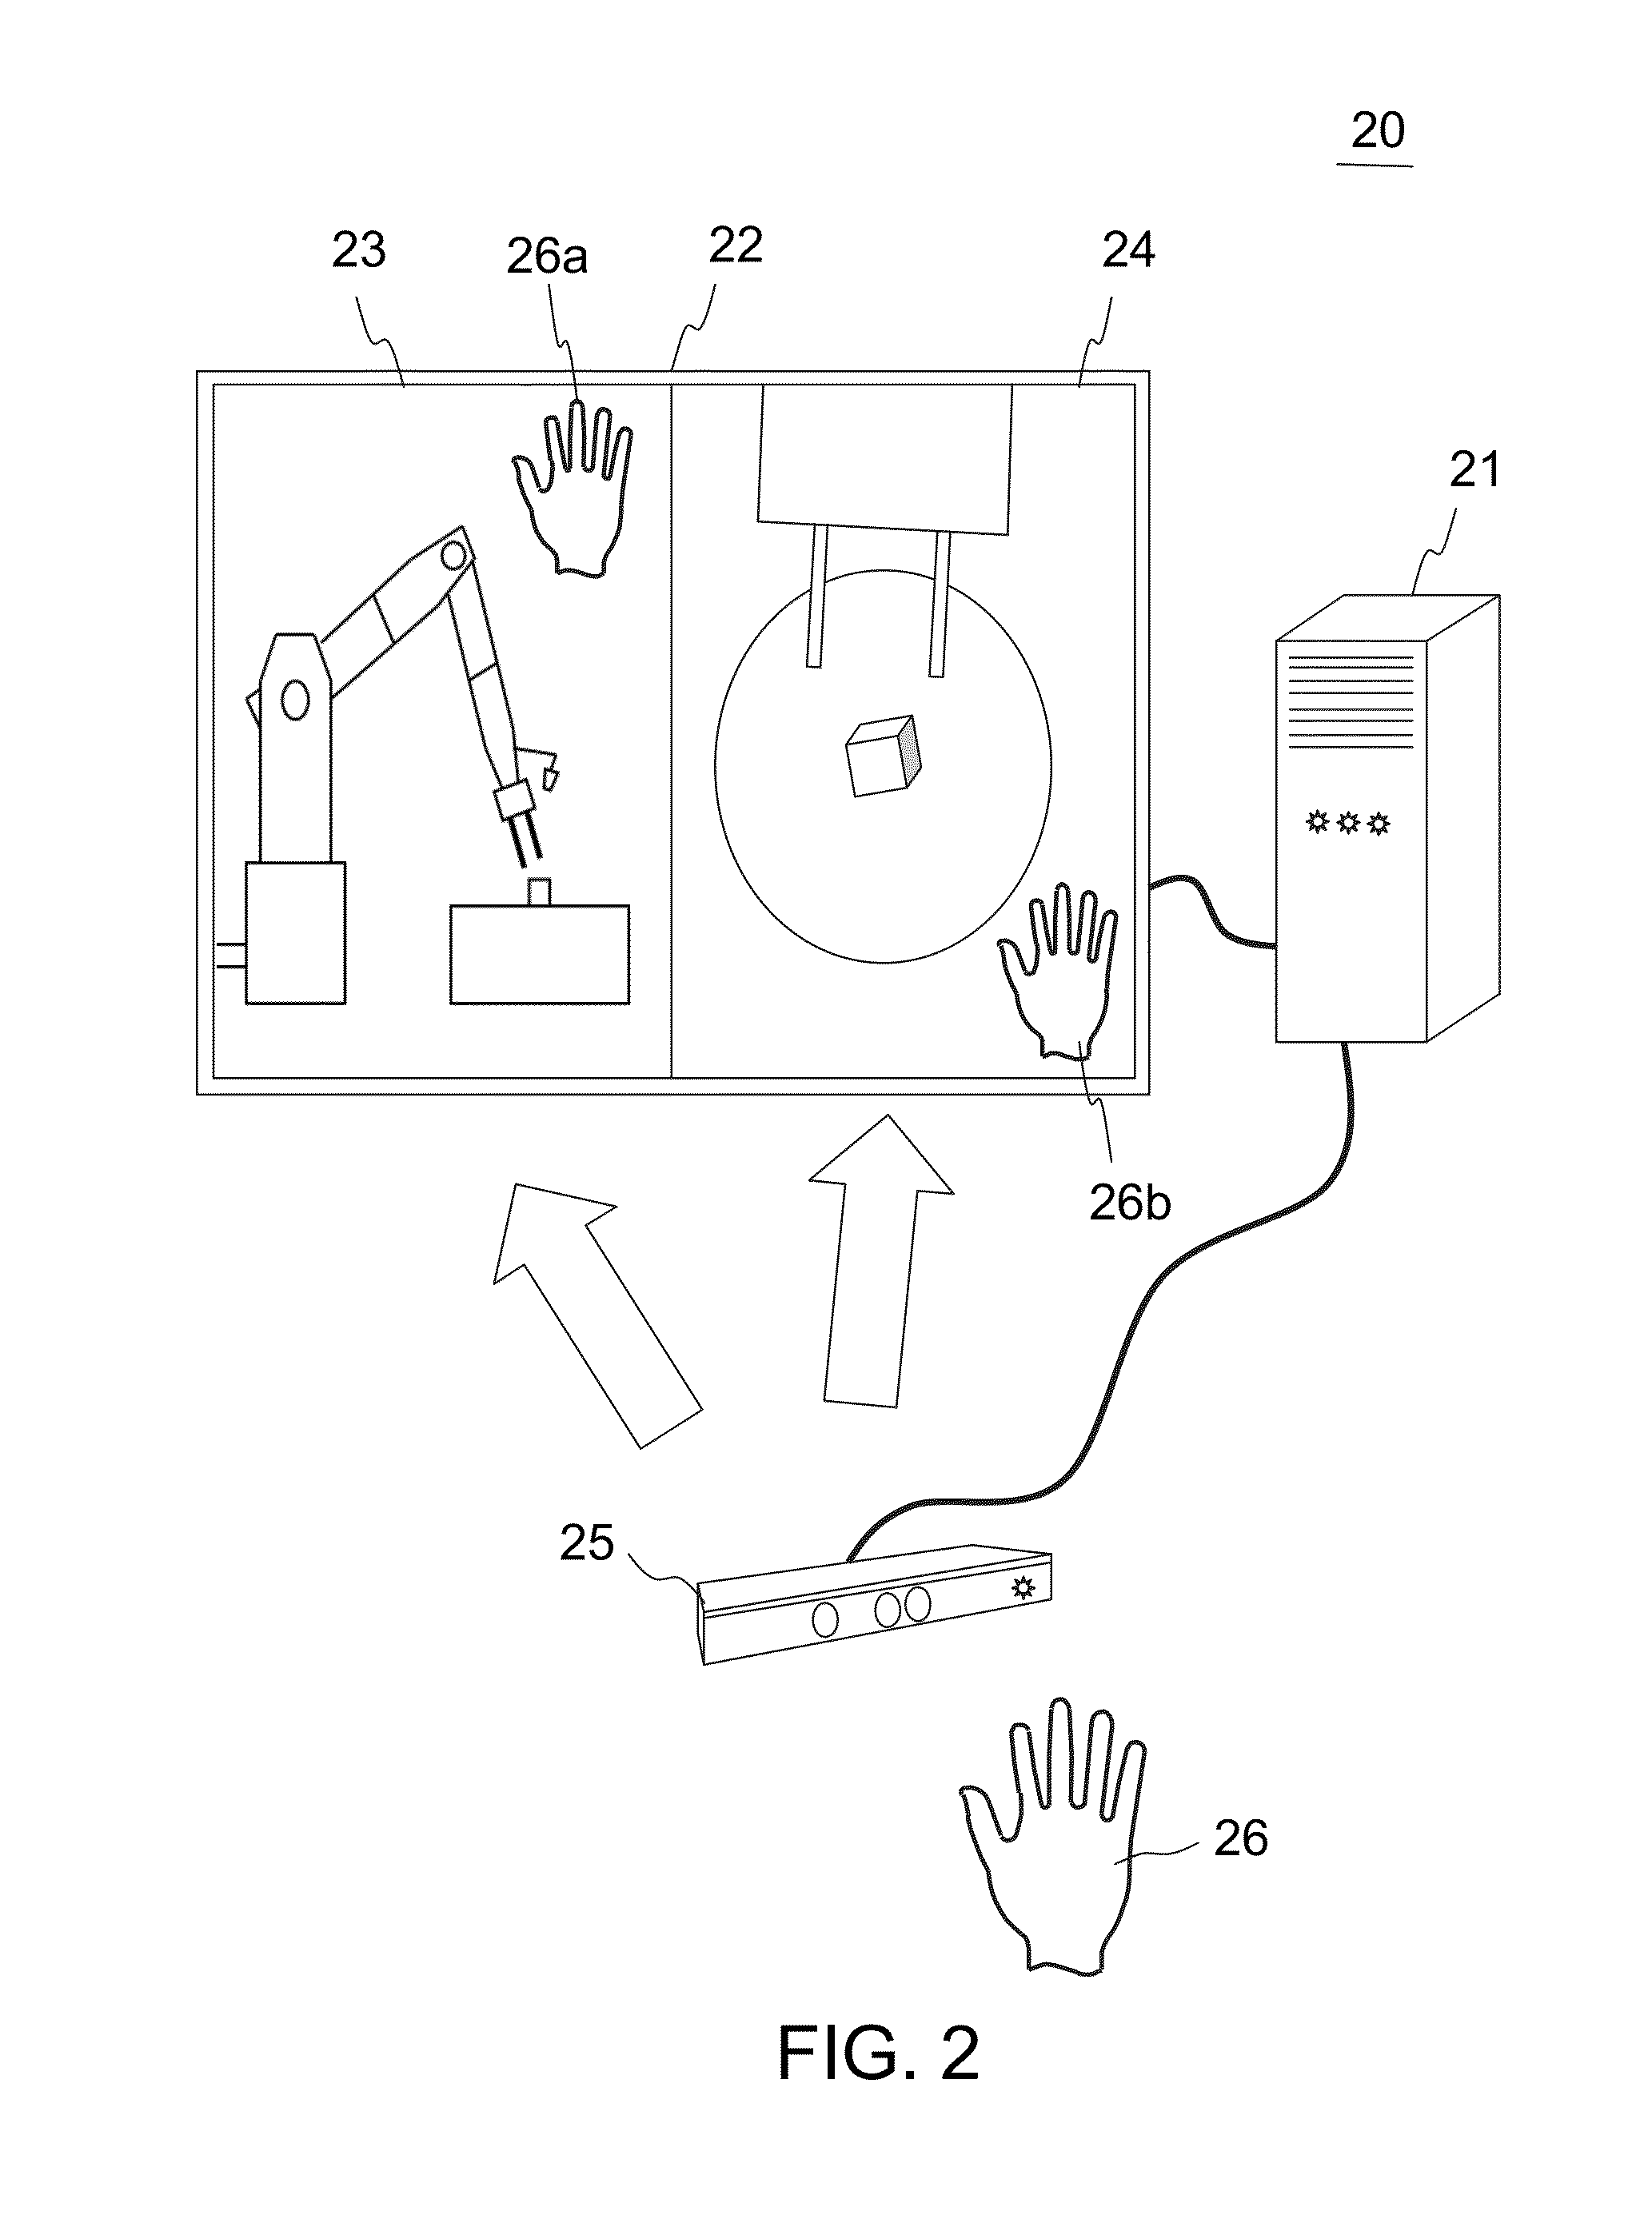 Teaching device and method for robotic arm